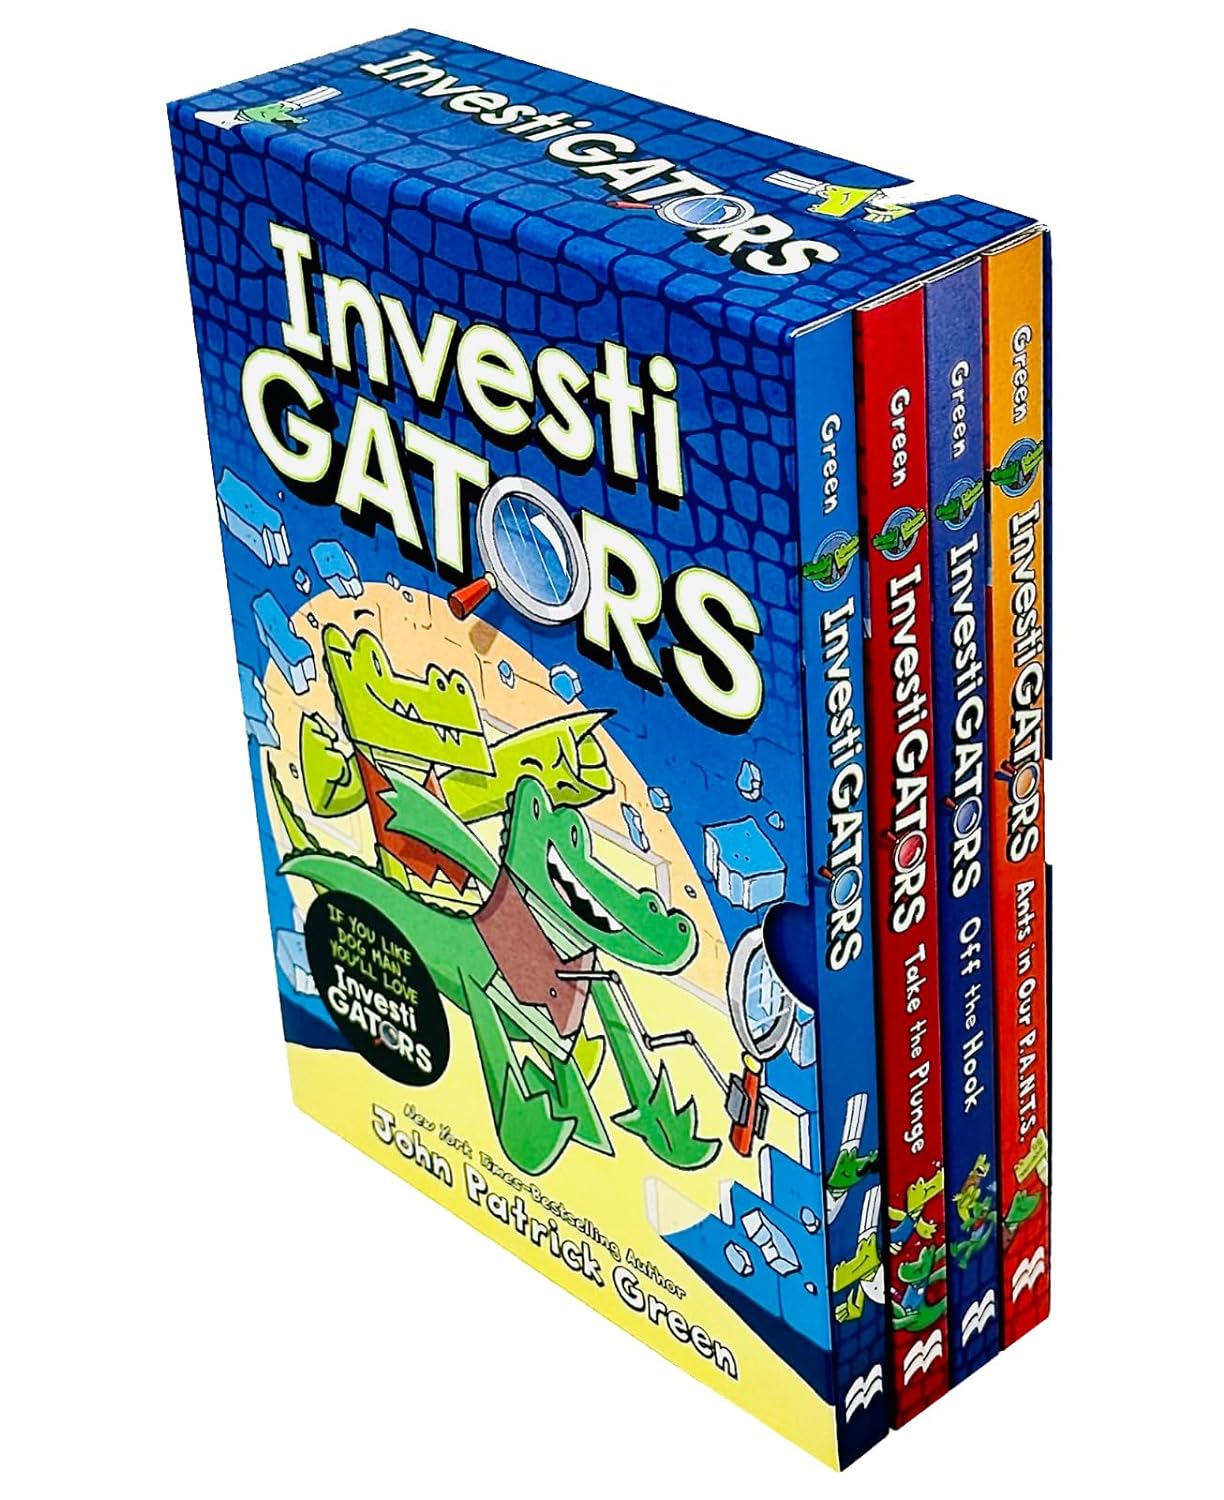 InvestiGators Series By John Patrick Green 4 Books Collection Box Set - Ages 7-9 - Paperback